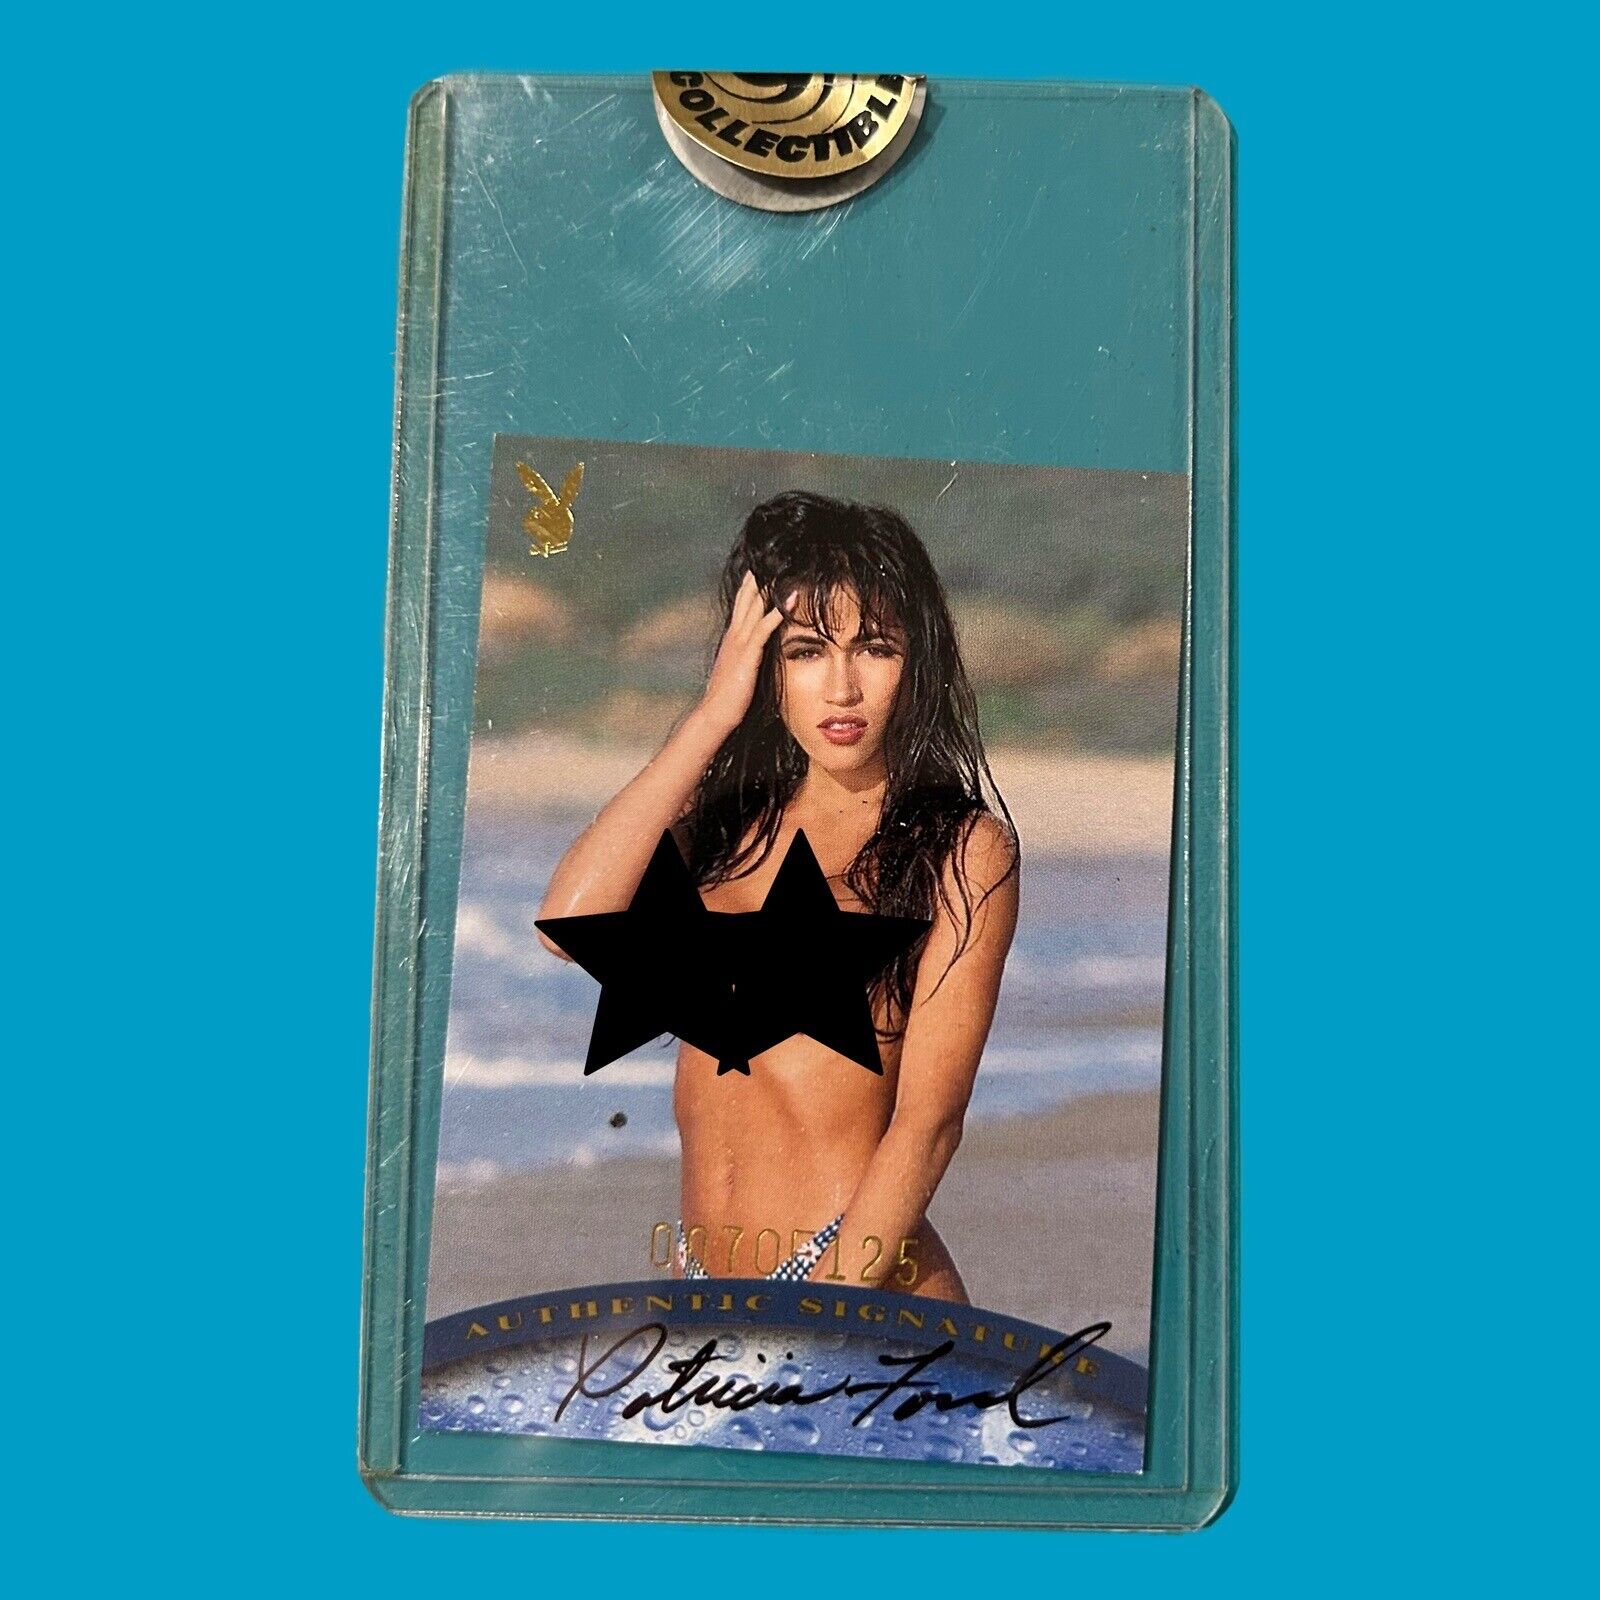 2001 PLAYBOY'S WET & WILD CARD LIMITED AUTOGRAPHED CARD PATRICIA FORD 7/125